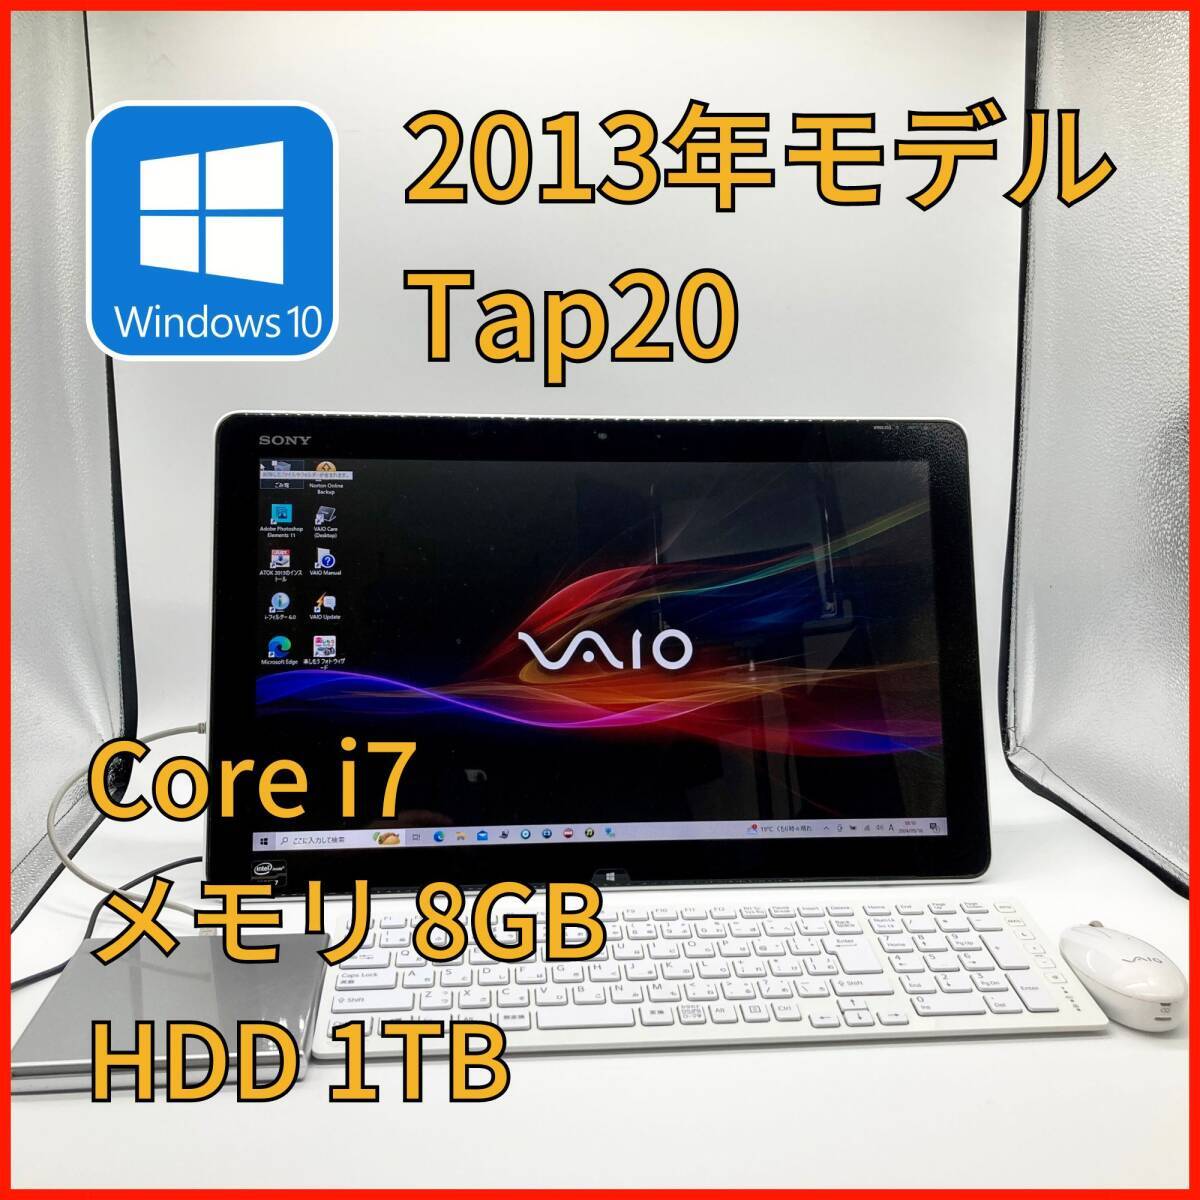 SONY VAIO Tap20 one body PC Core i7 3537U 2.0Ghz no. 3 generation 8GB HDD 1TB SVJ202B17N touch panel installing table top PC 20 -inch 